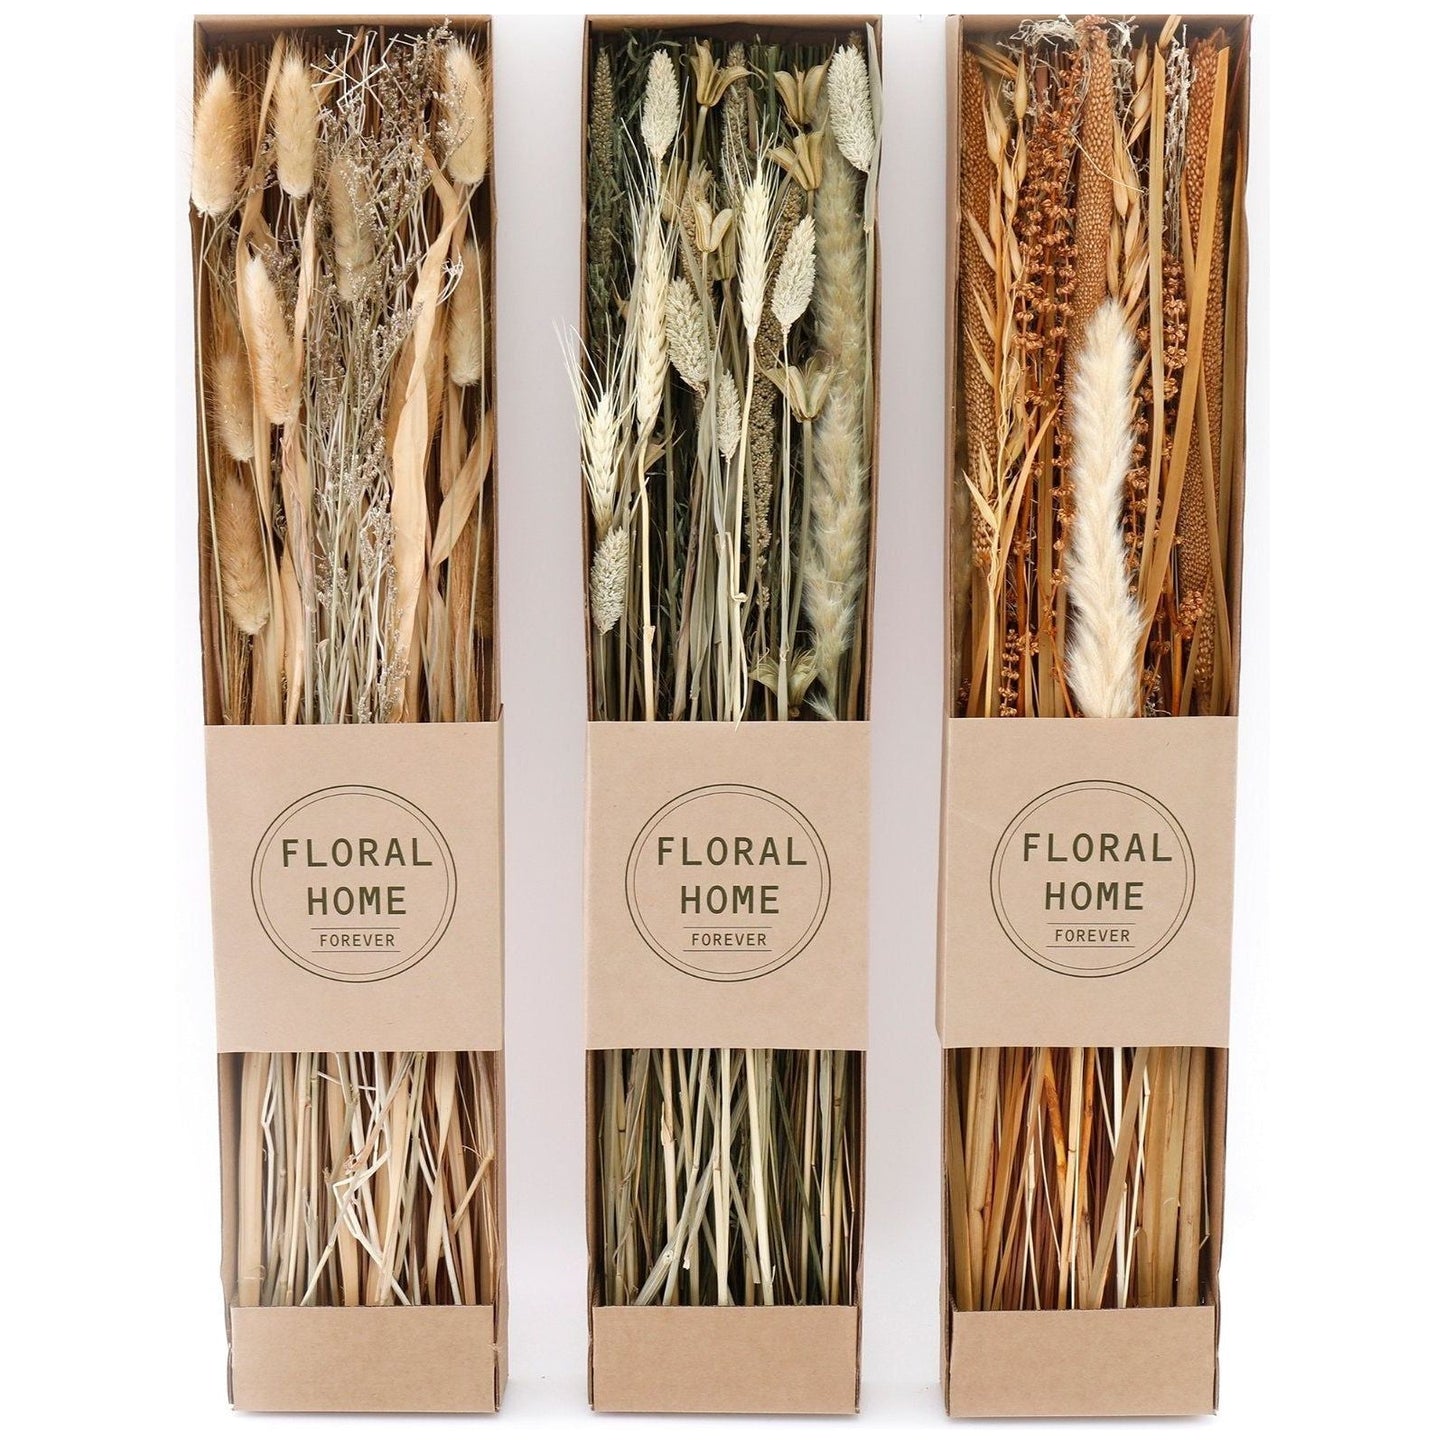 Set of 3 Dried Grasses in Display Box - Ashton and Finch